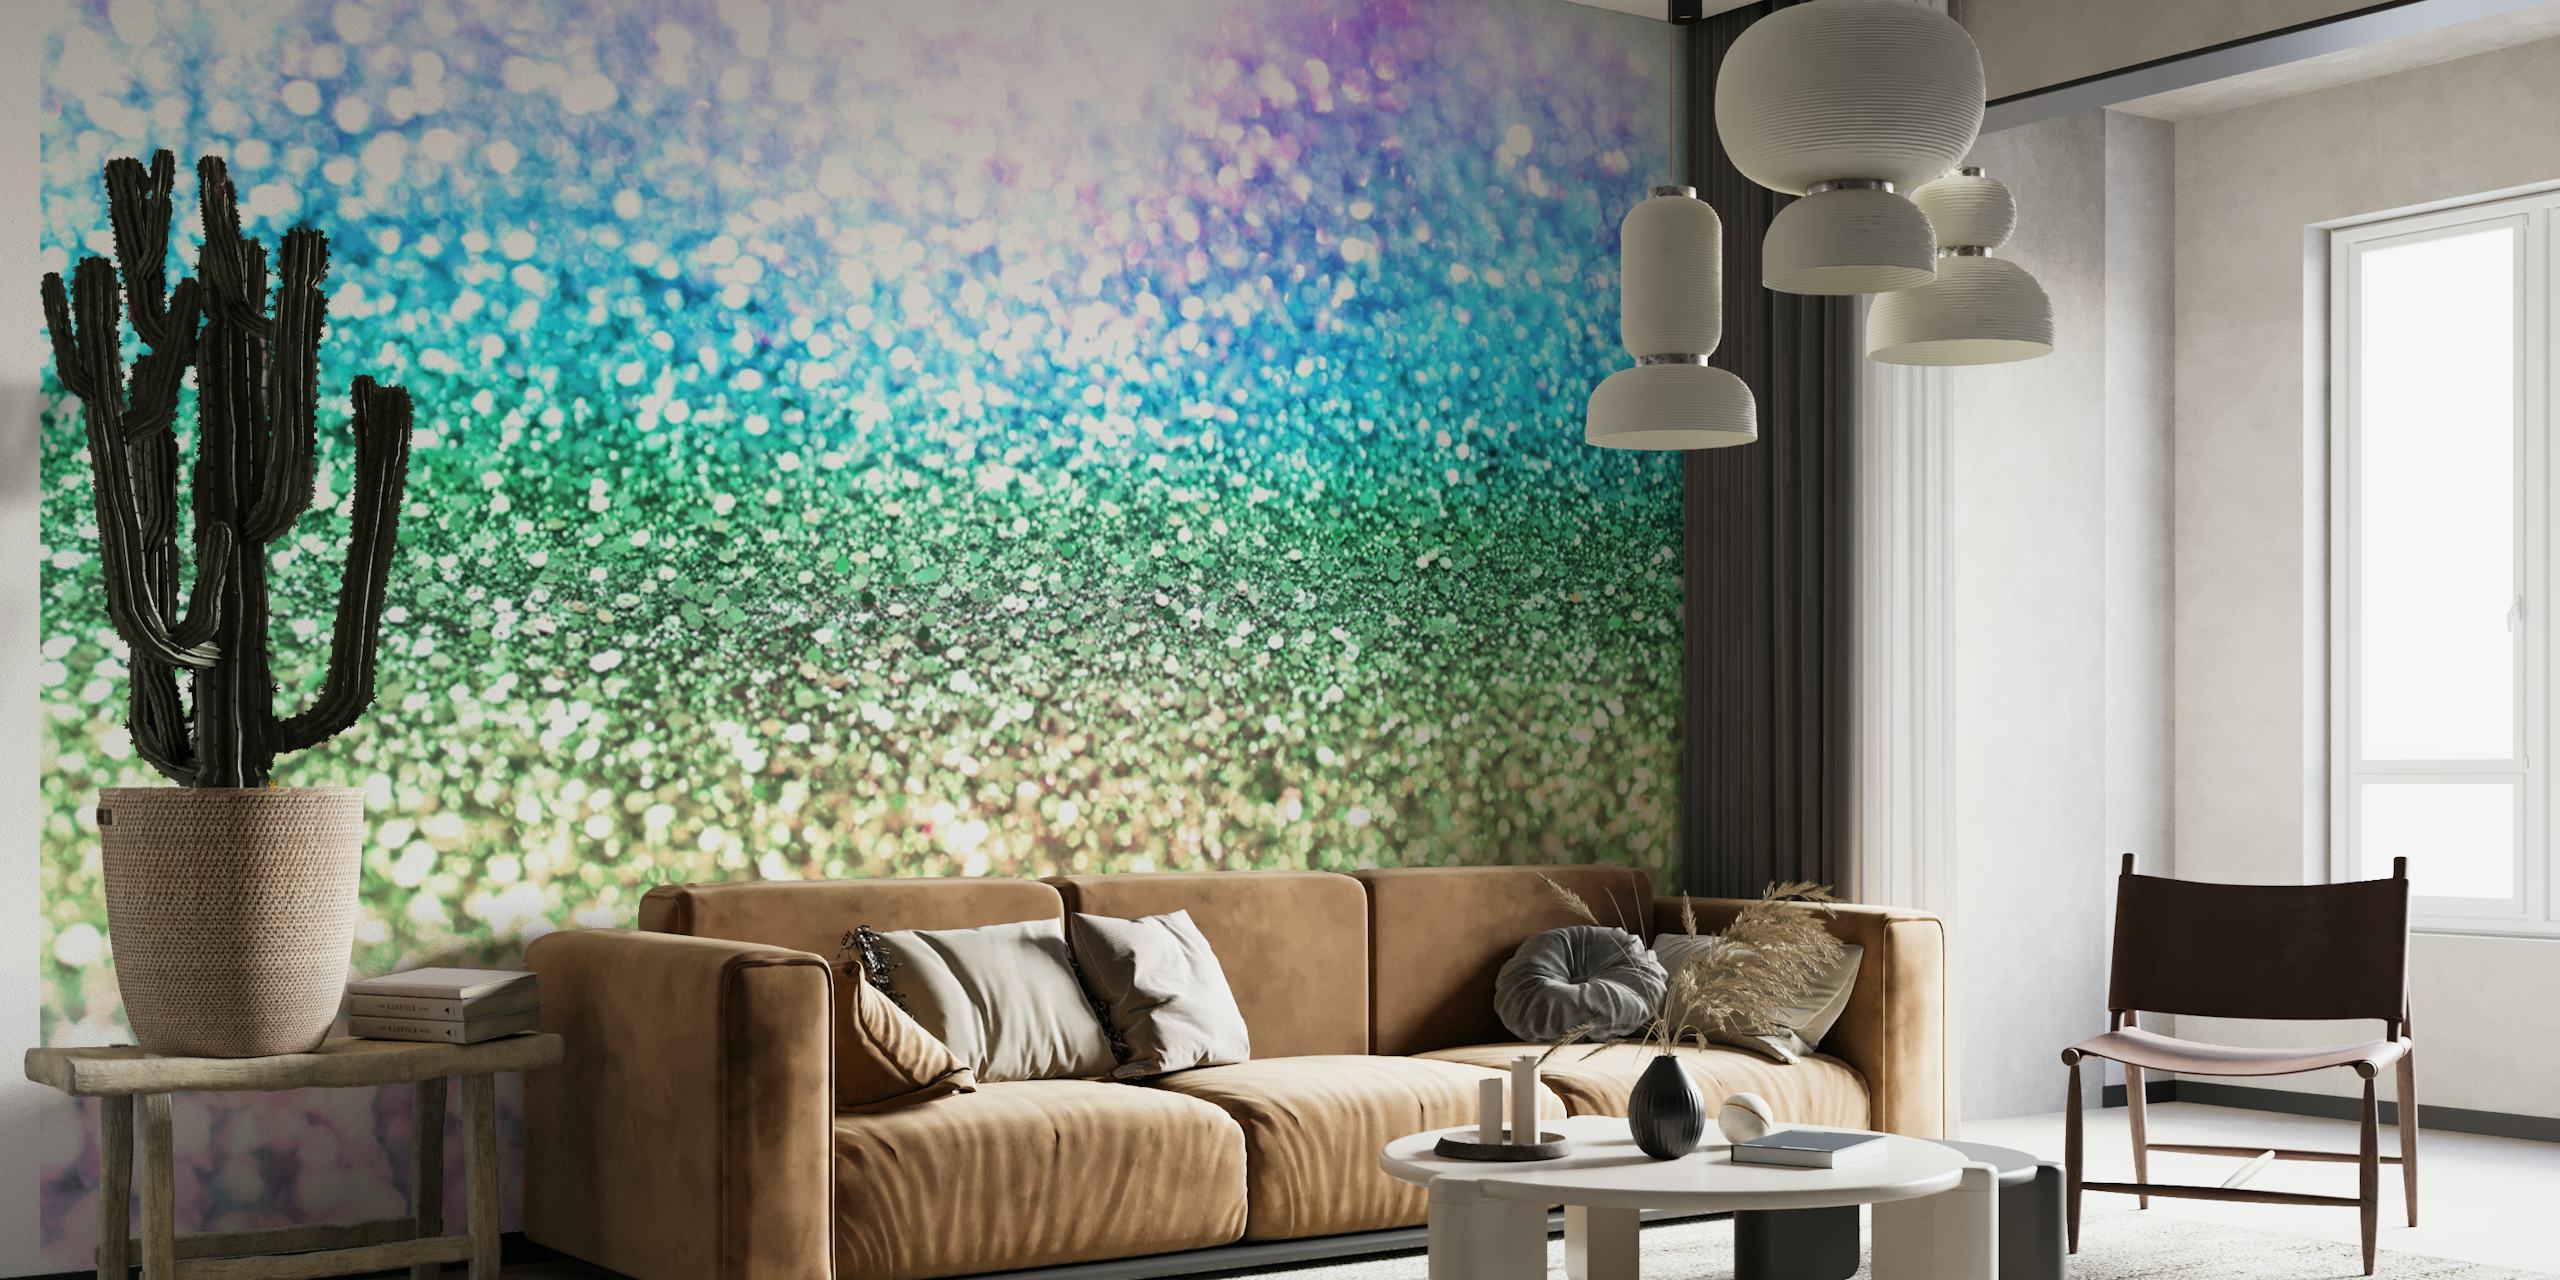 Pastel rainbow glitter wall mural with a sparkling texture, ideal for vibrant and whimsical decor themes